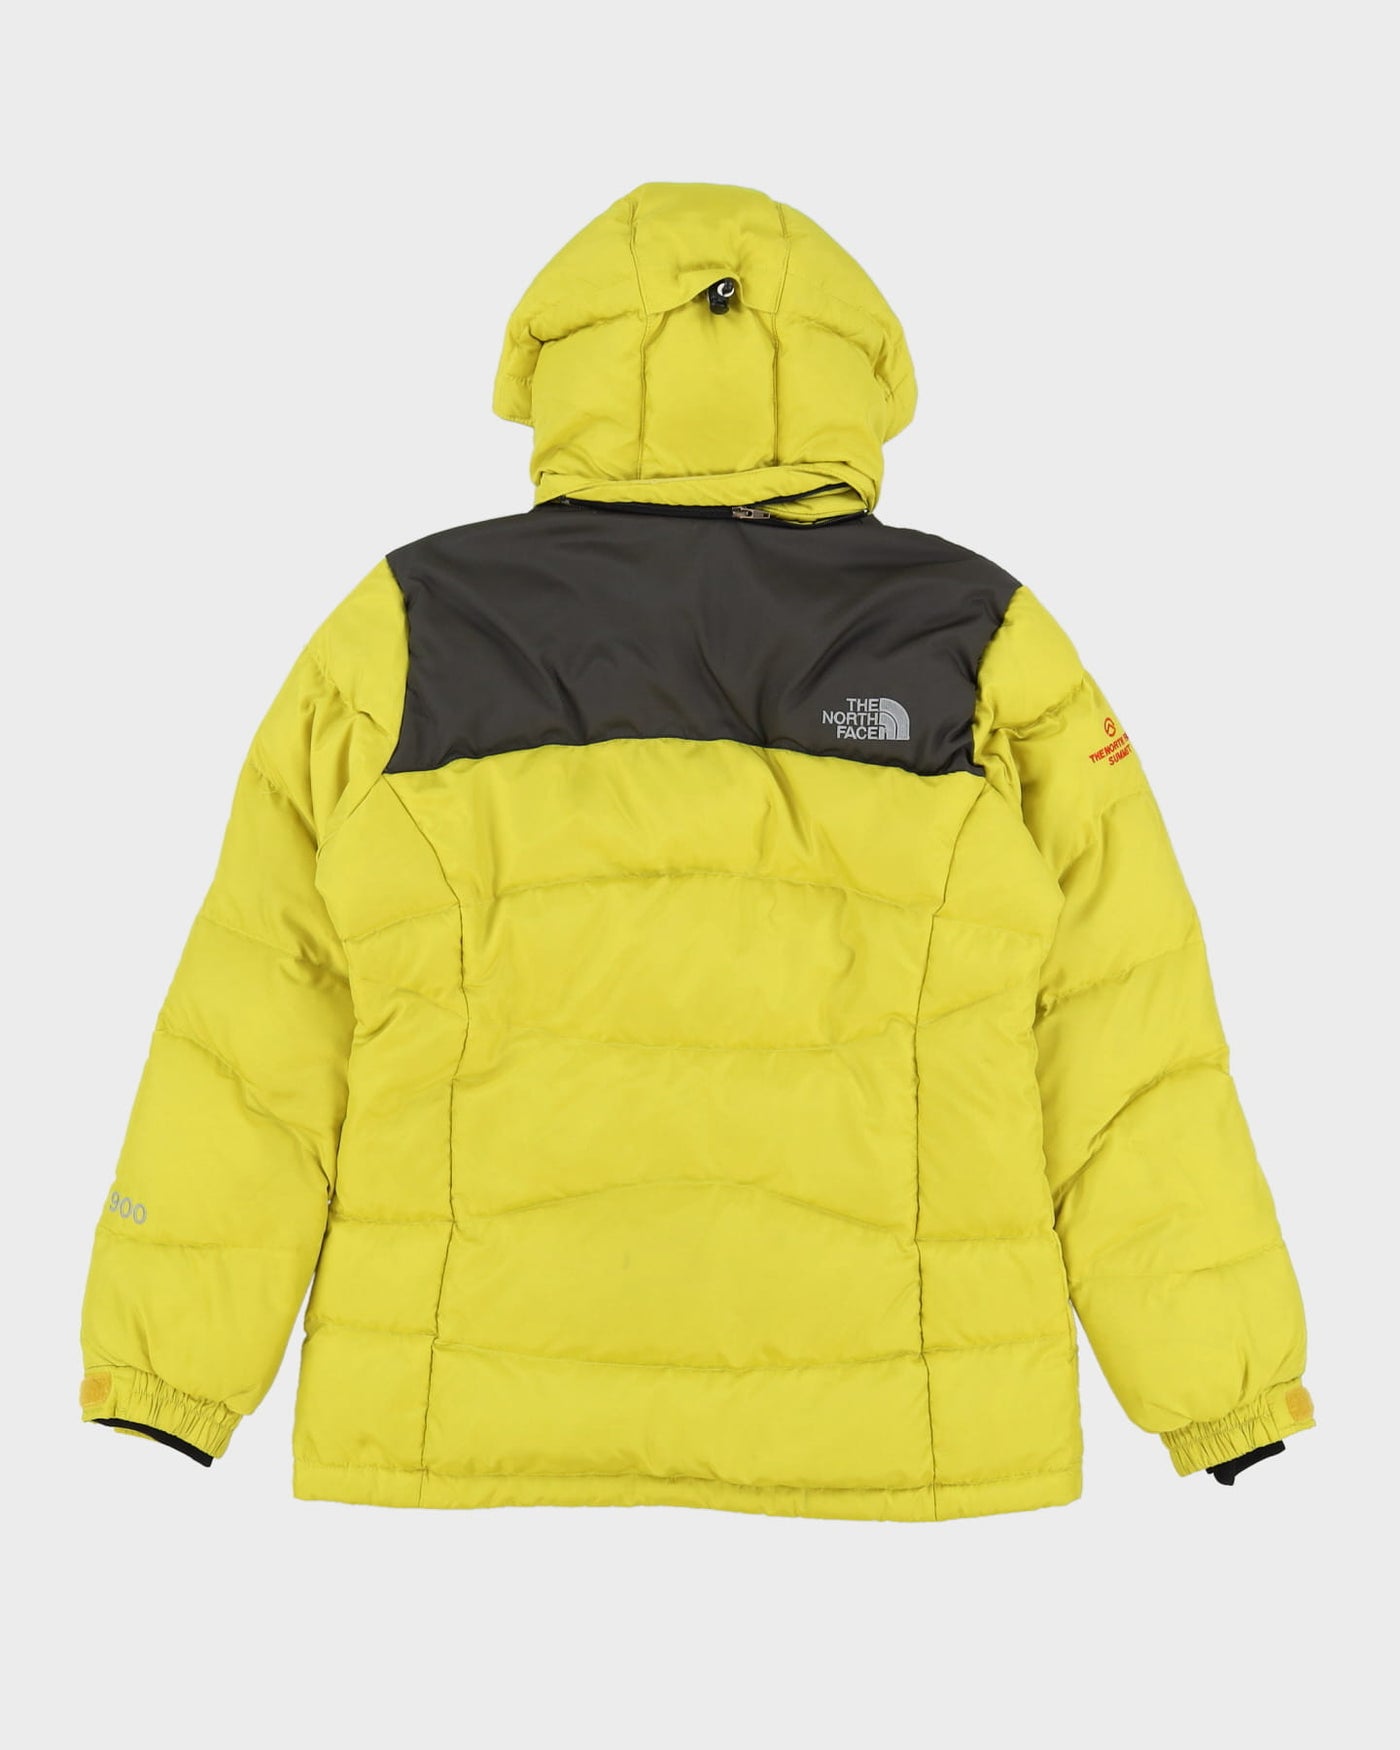 The North Face Green Hooded Puffer Jacket - M